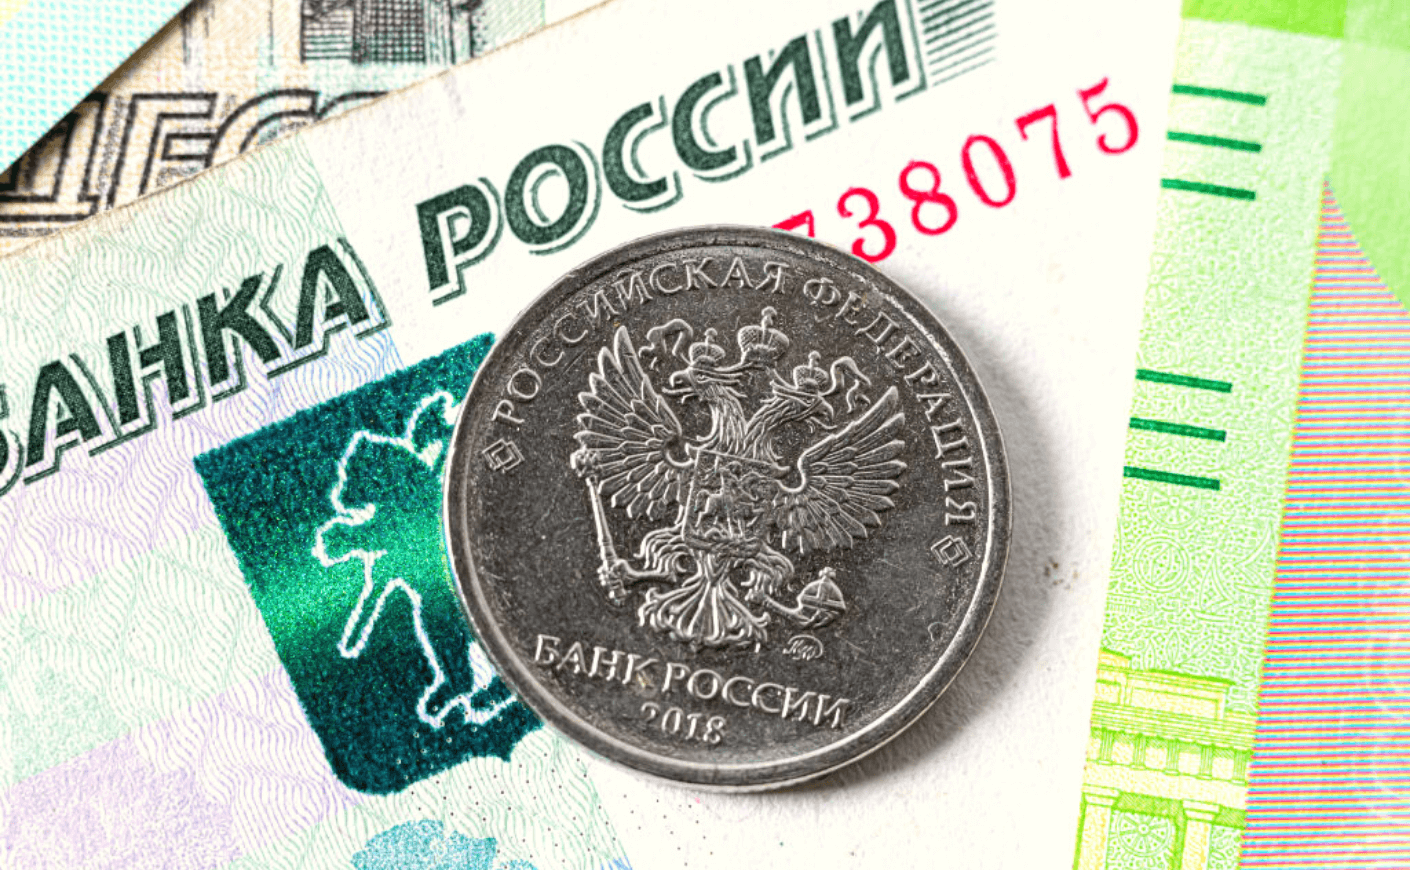 Russian ruble coin and paper currency